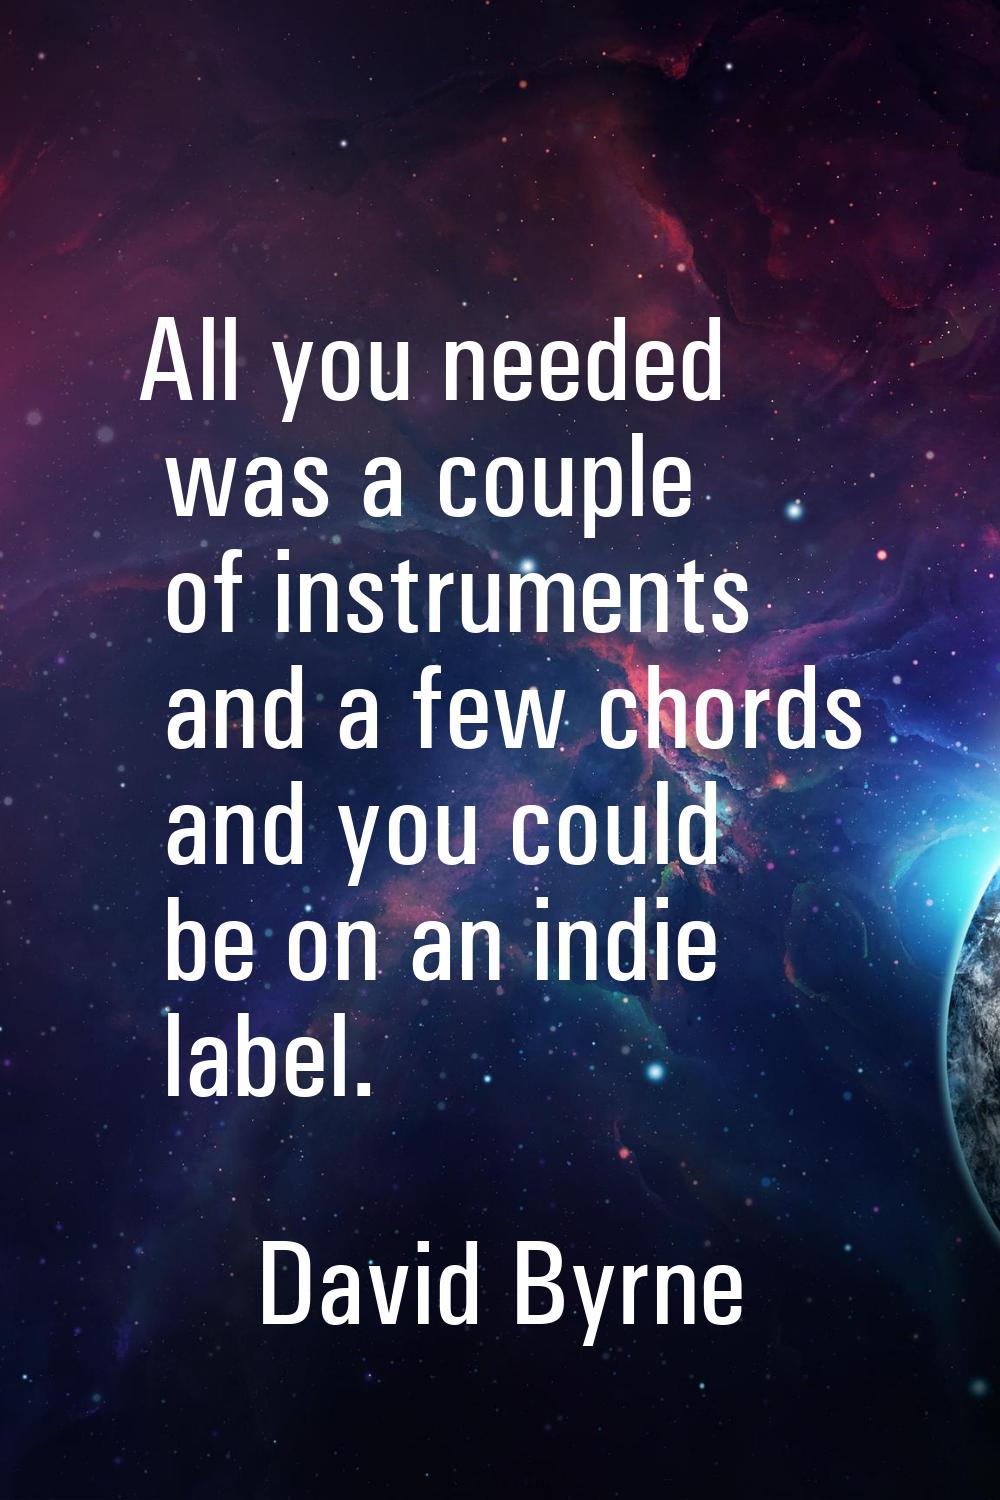 All you needed was a couple of instruments and a few chords and you could be on an indie label.